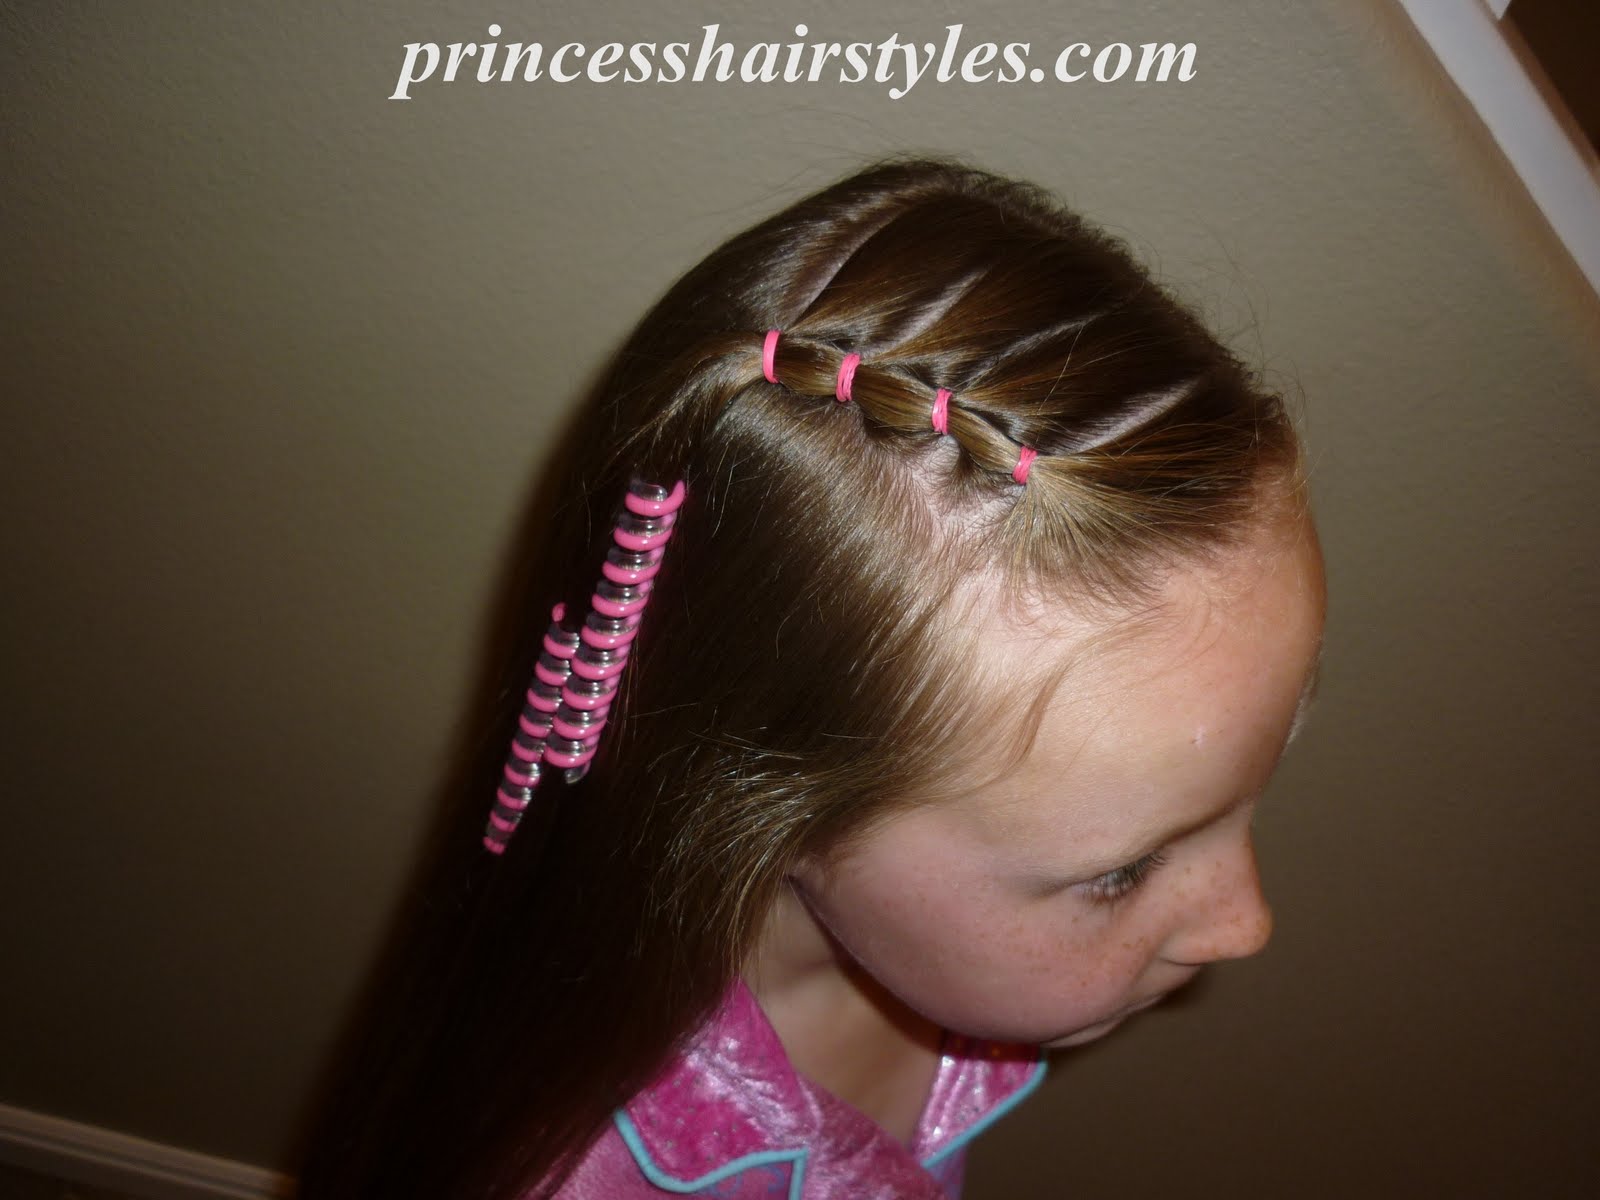 Elastics To The Side | Hairstyles For Girls - Princess Hairstyles